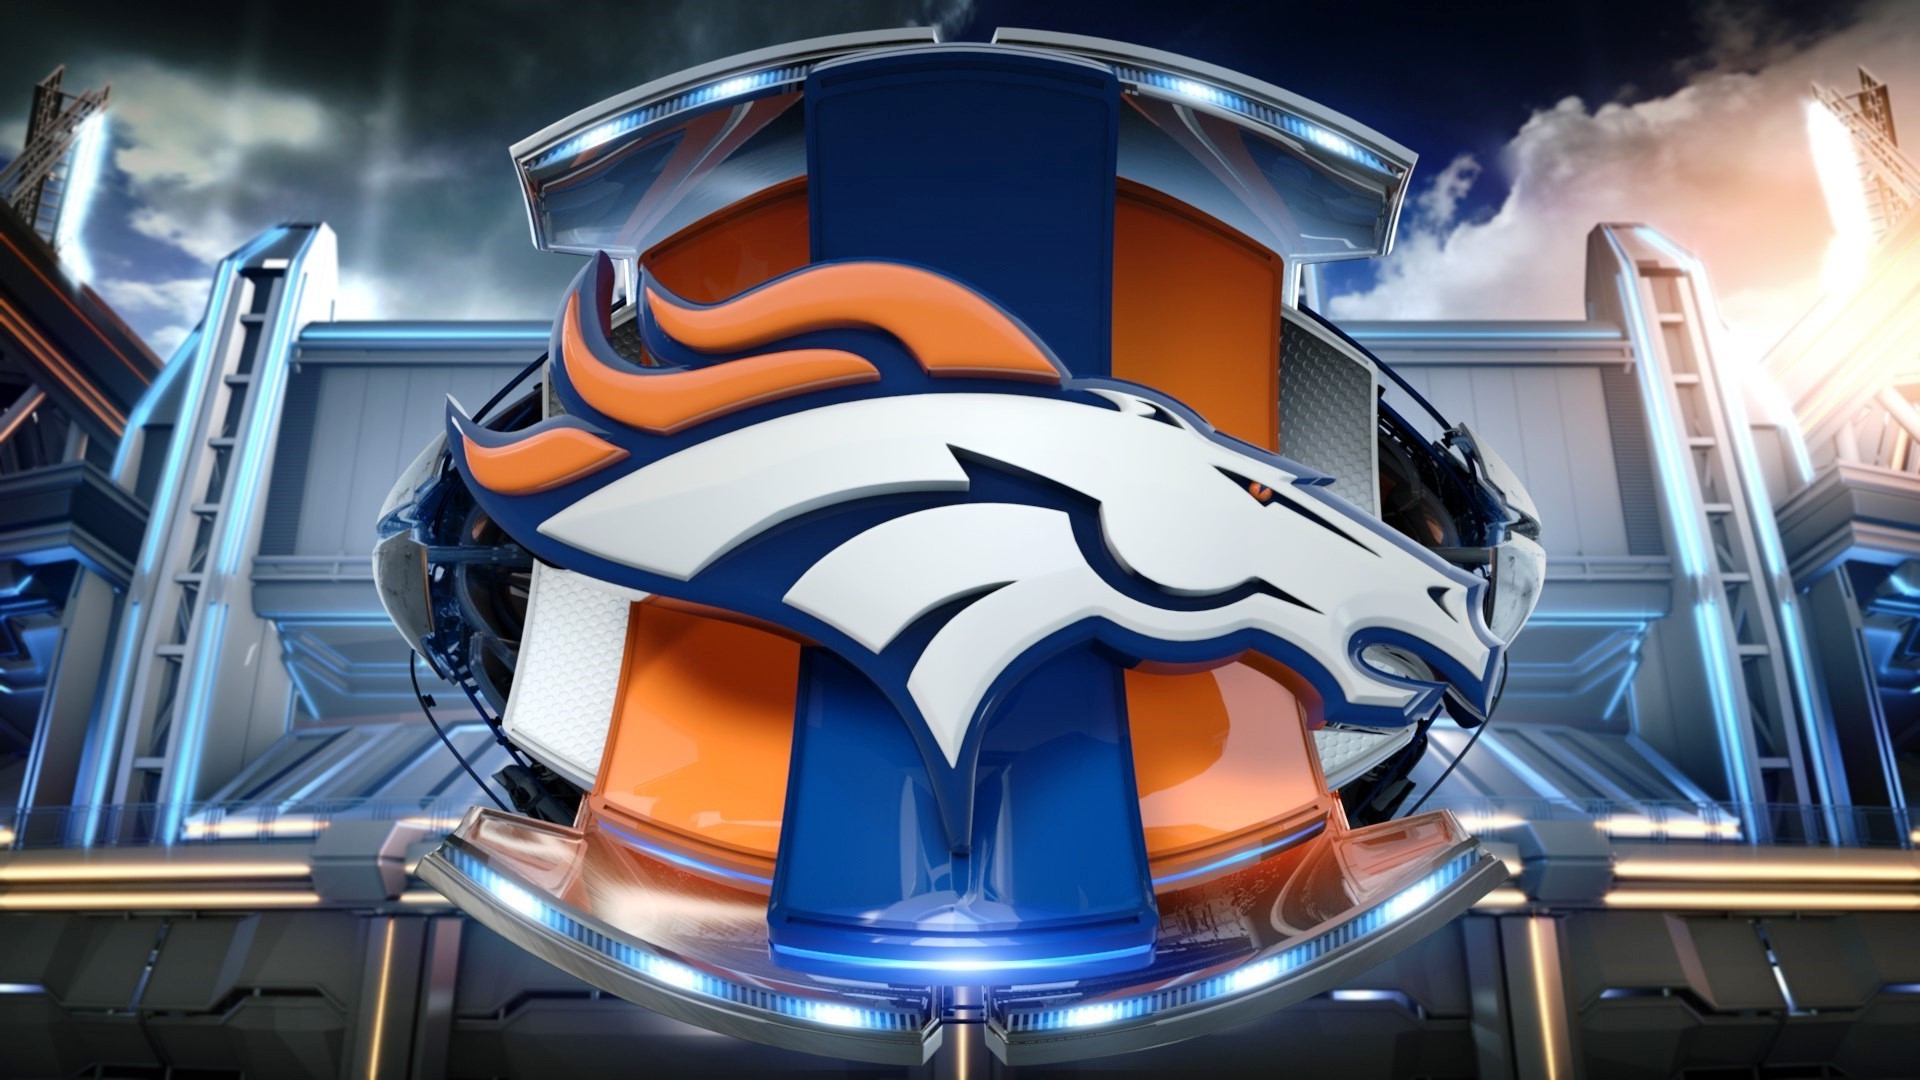 Denver Broncos Desktop Backgrounds With high-resolution 1920X1080 pixel. Download and set as wallpaper for Desktop Computer, Apple iPhone X, XS Max, XR, 8, 7, 6, SE, iPad, Android